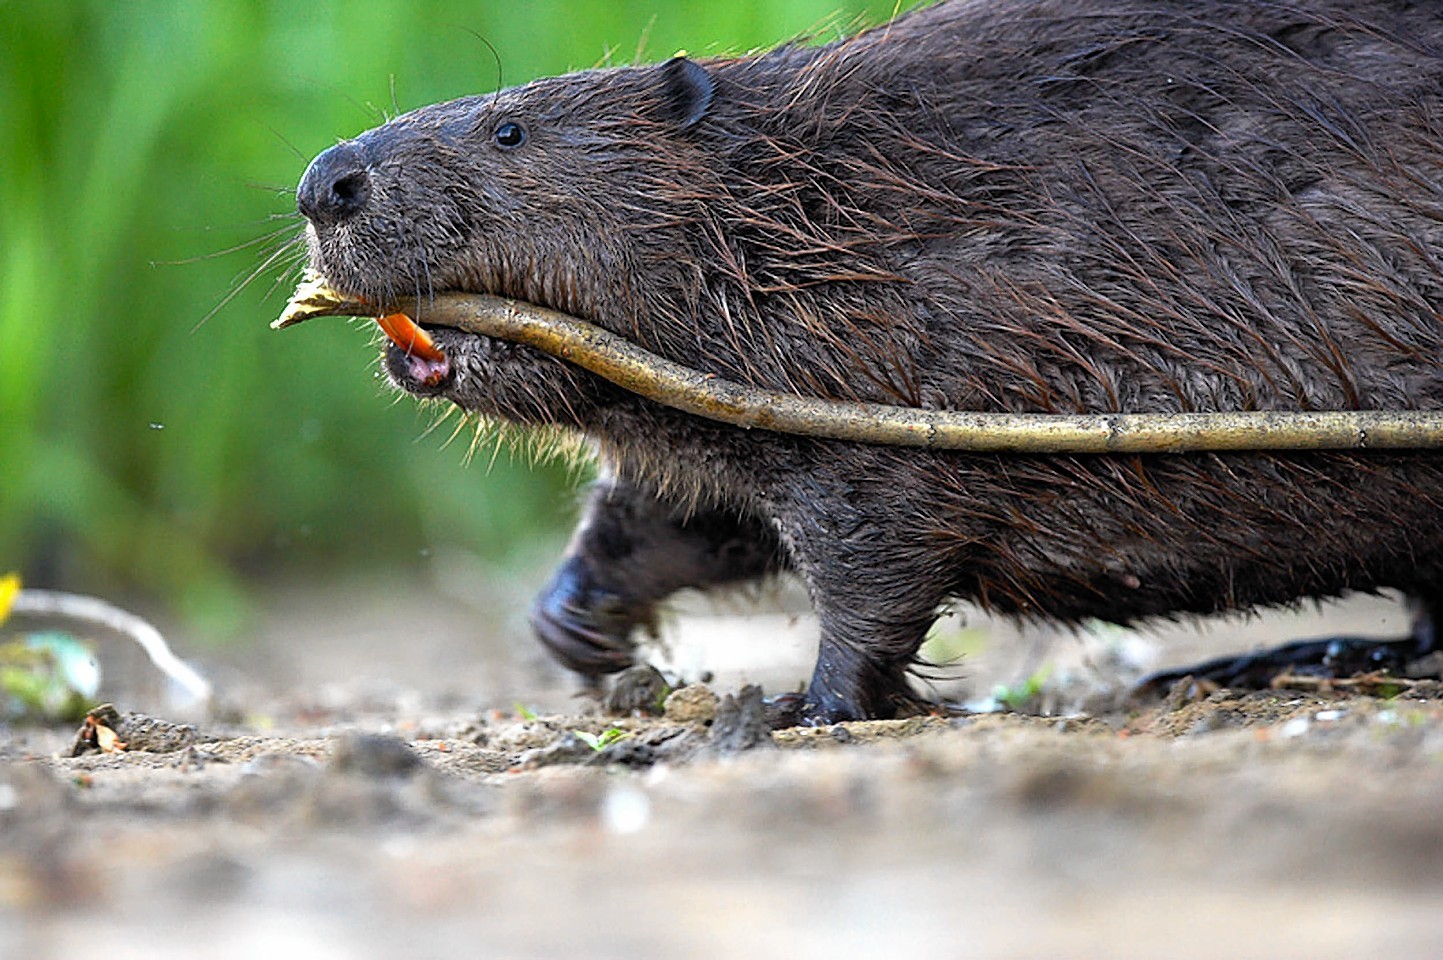 Bavarian beaver are thriving after escaping